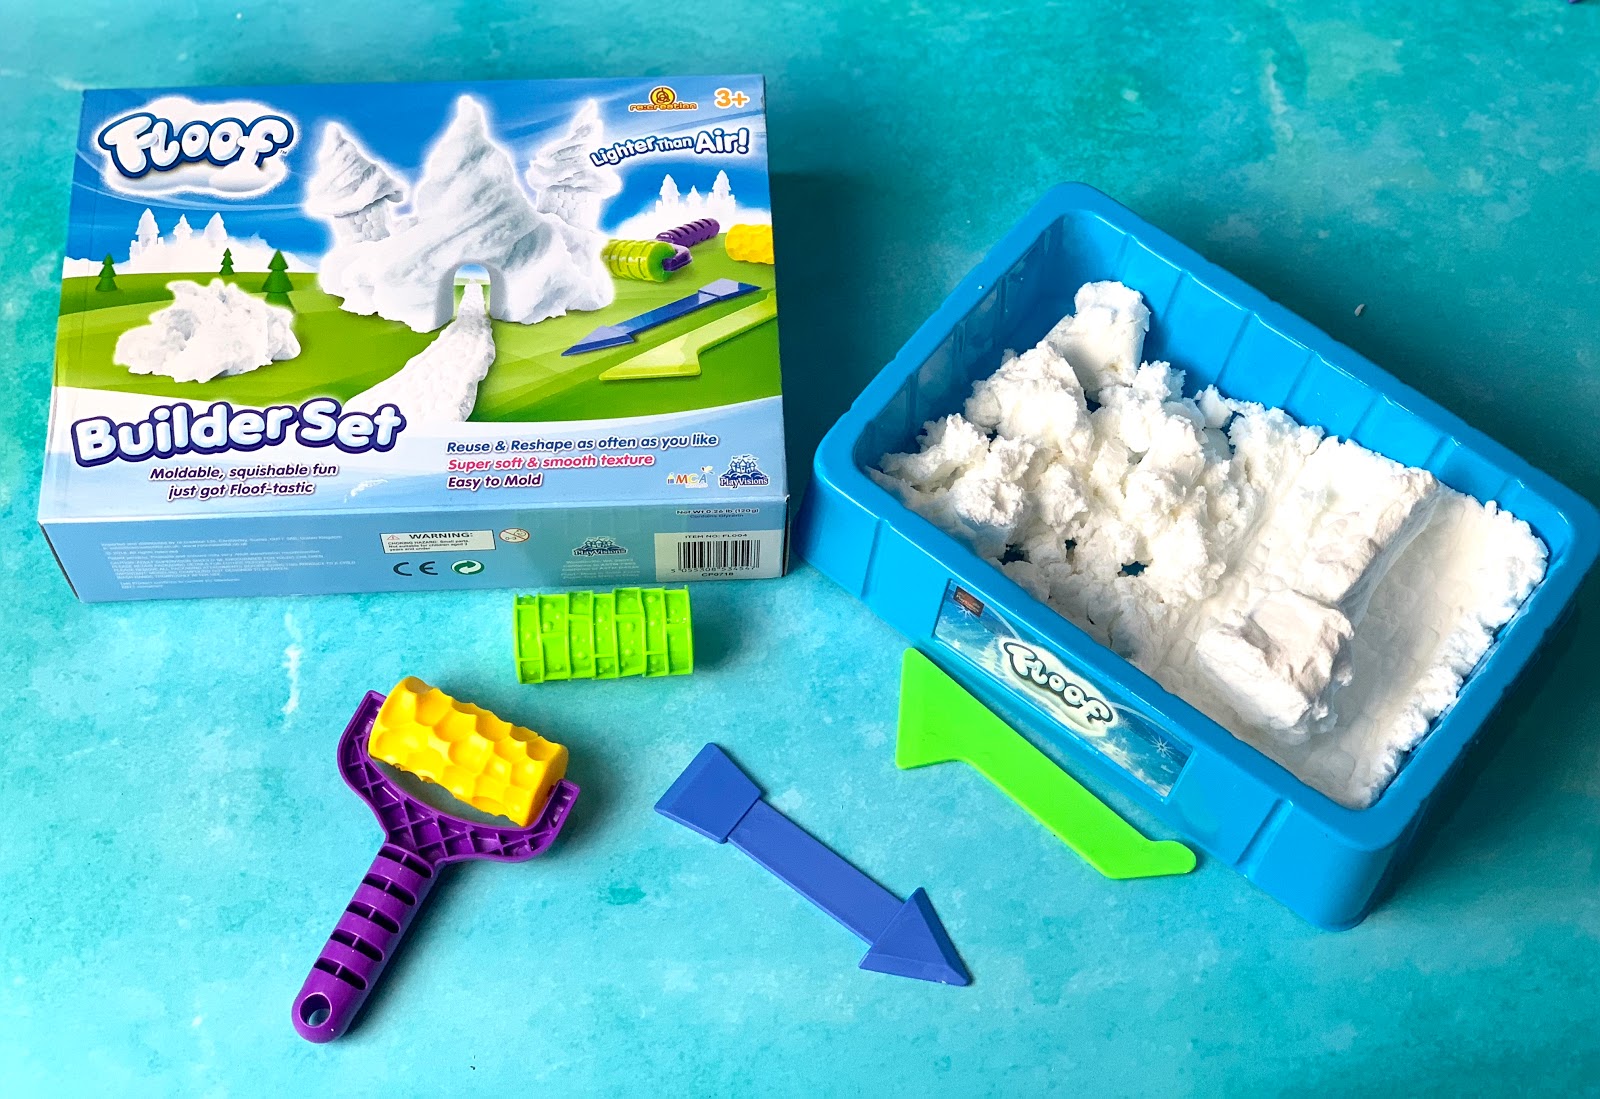 Fun with Floof: Moldable Play compound that's lighter than air!